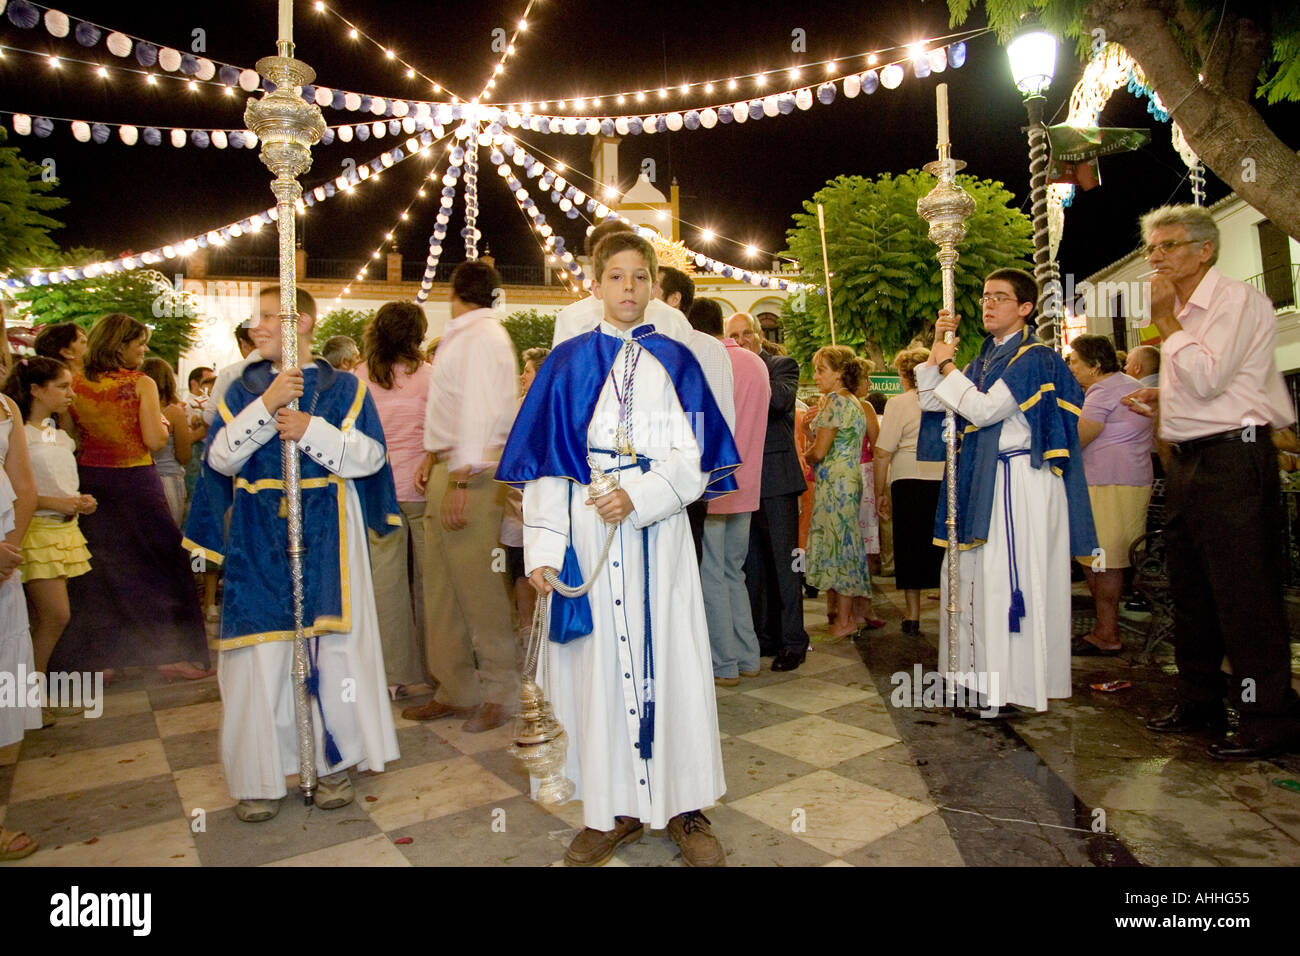 Acolytes during a night procession, Aznalcazar, Seville, Spain Stock Photo